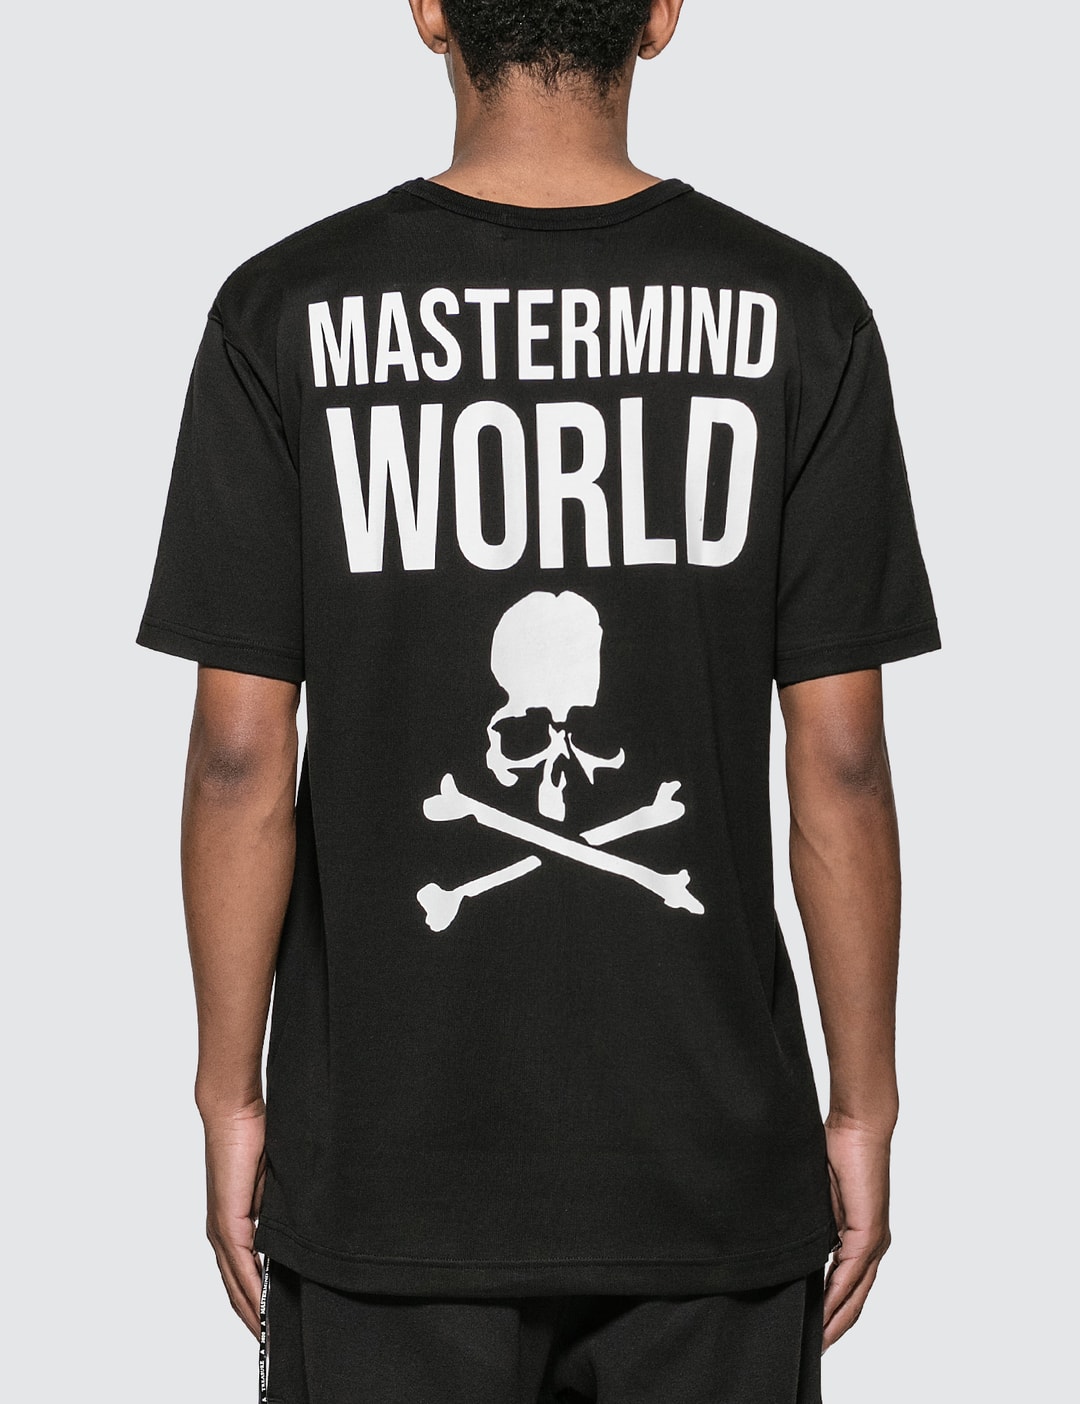 Mastermind World - Forever Young At Heart T-shirt | HBX - Globally ...